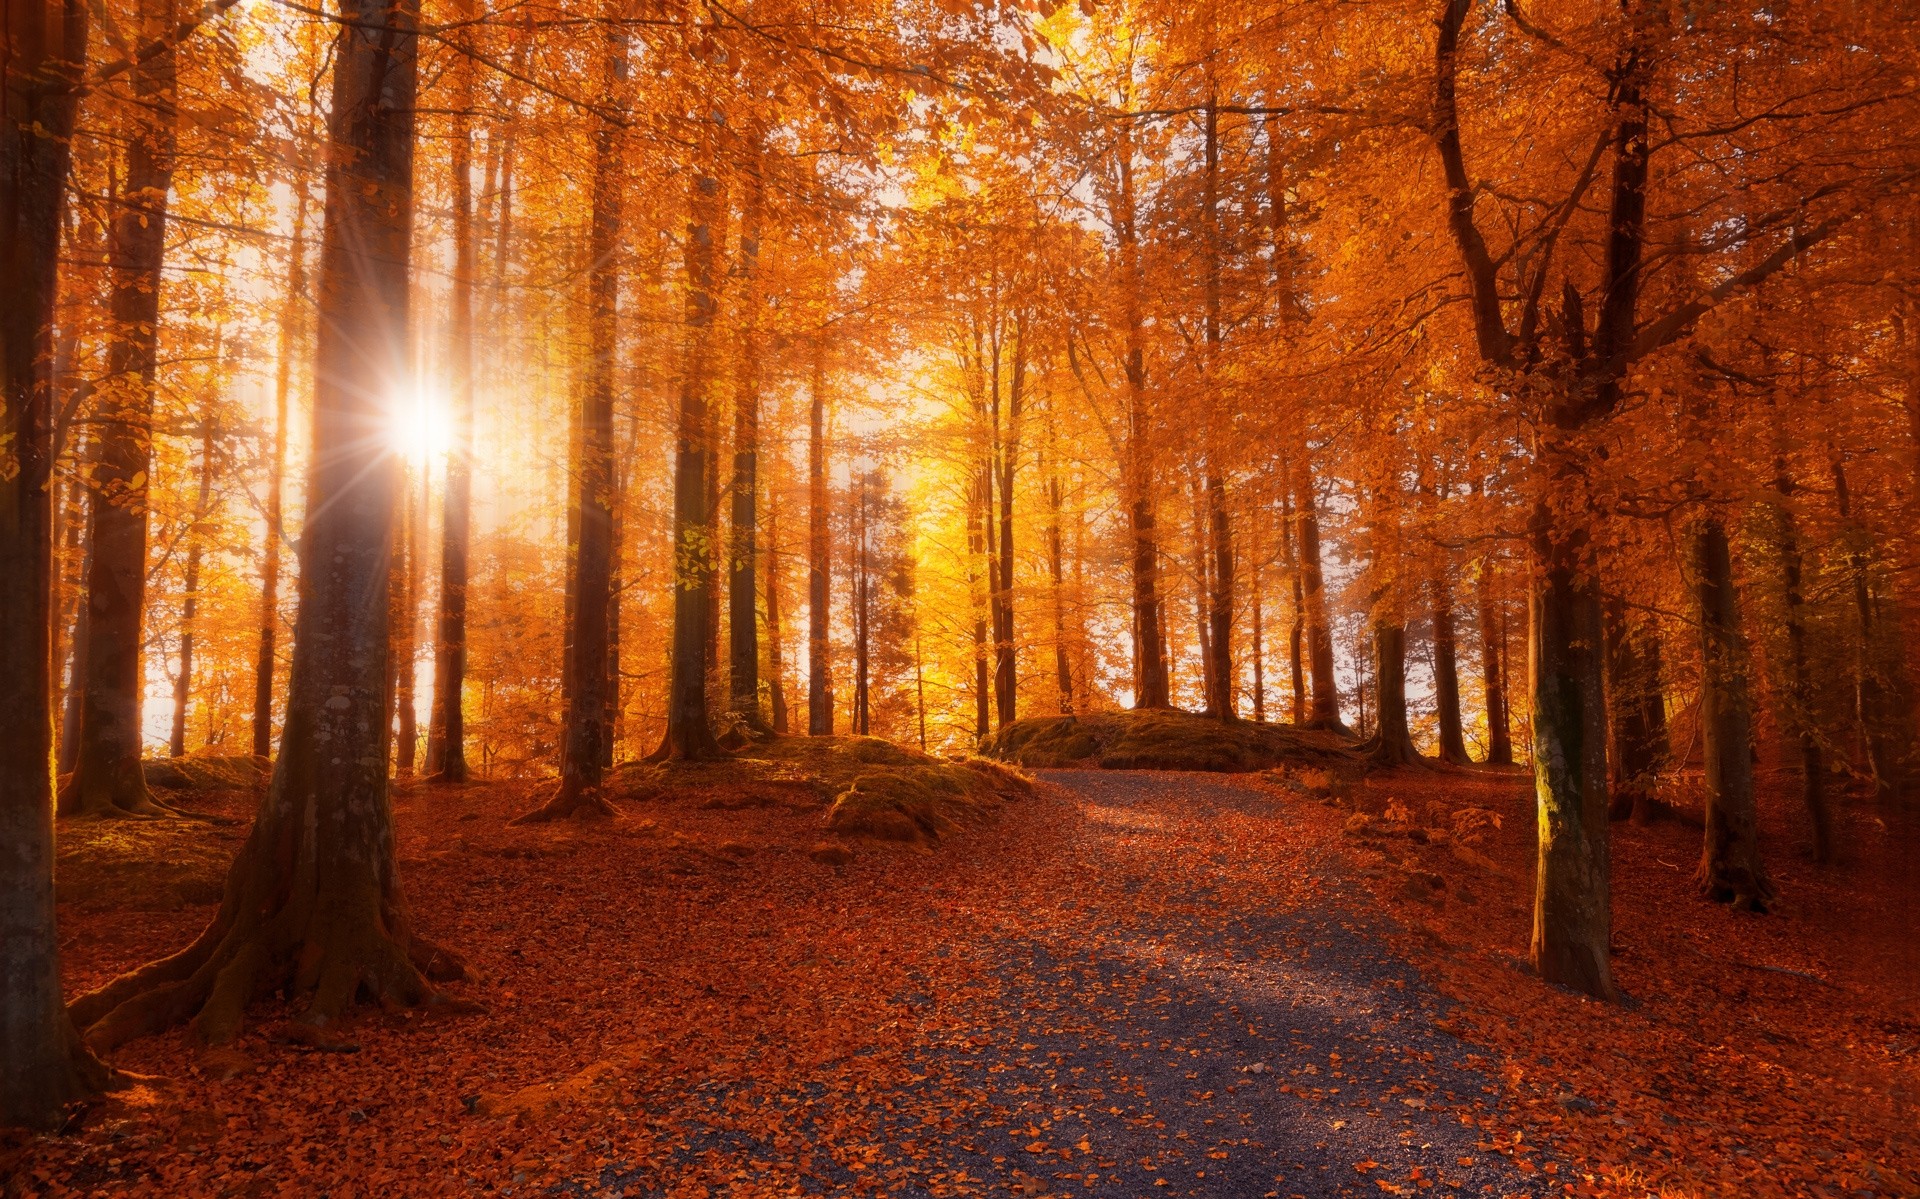 General 1920x1199 morning forest sunlight path trees fall leaves nature Norway dirt road orange plants outdoors fallen leaves